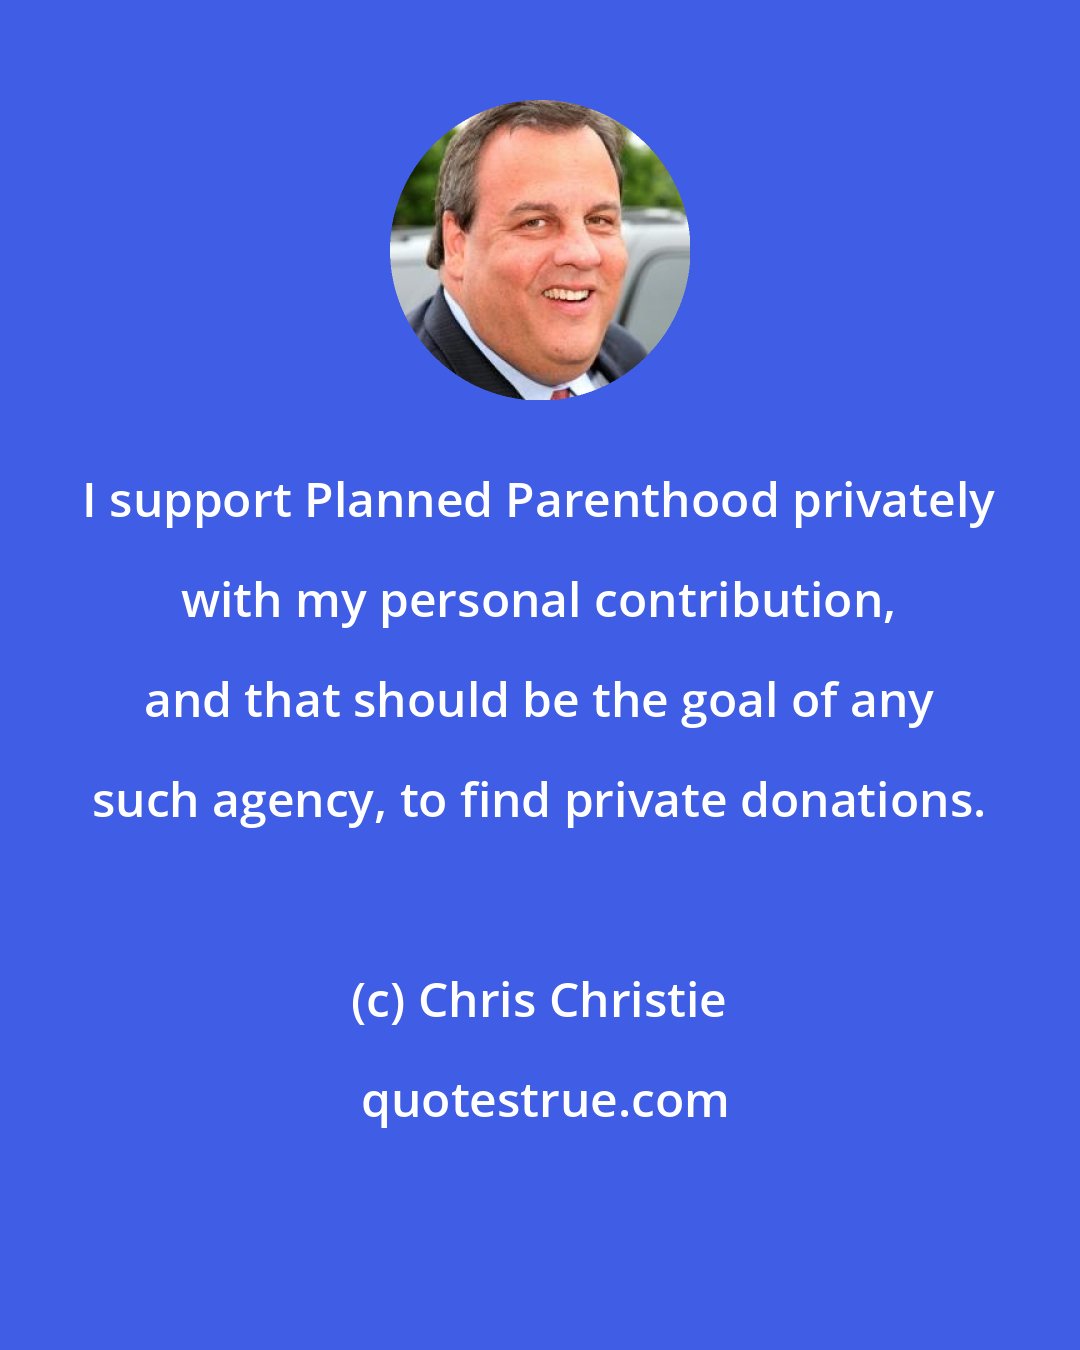 Chris Christie: I support Planned Parenthood privately with my personal contribution, and that should be the goal of any such agency, to find private donations.